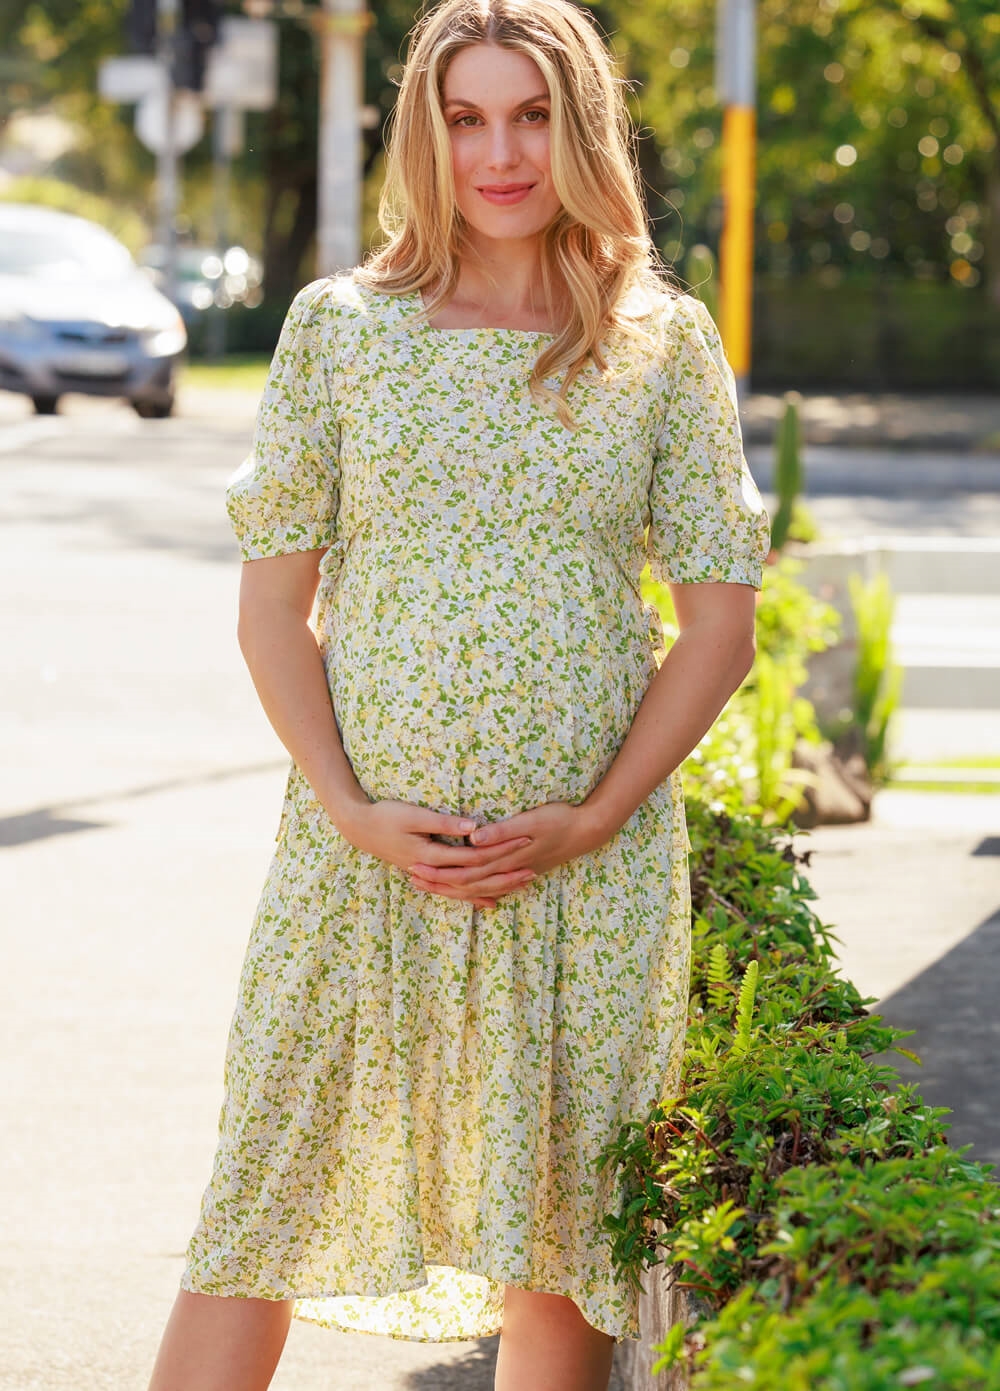 Lait & Co - Lea-Claire Maternity Dress in Yellow Floral